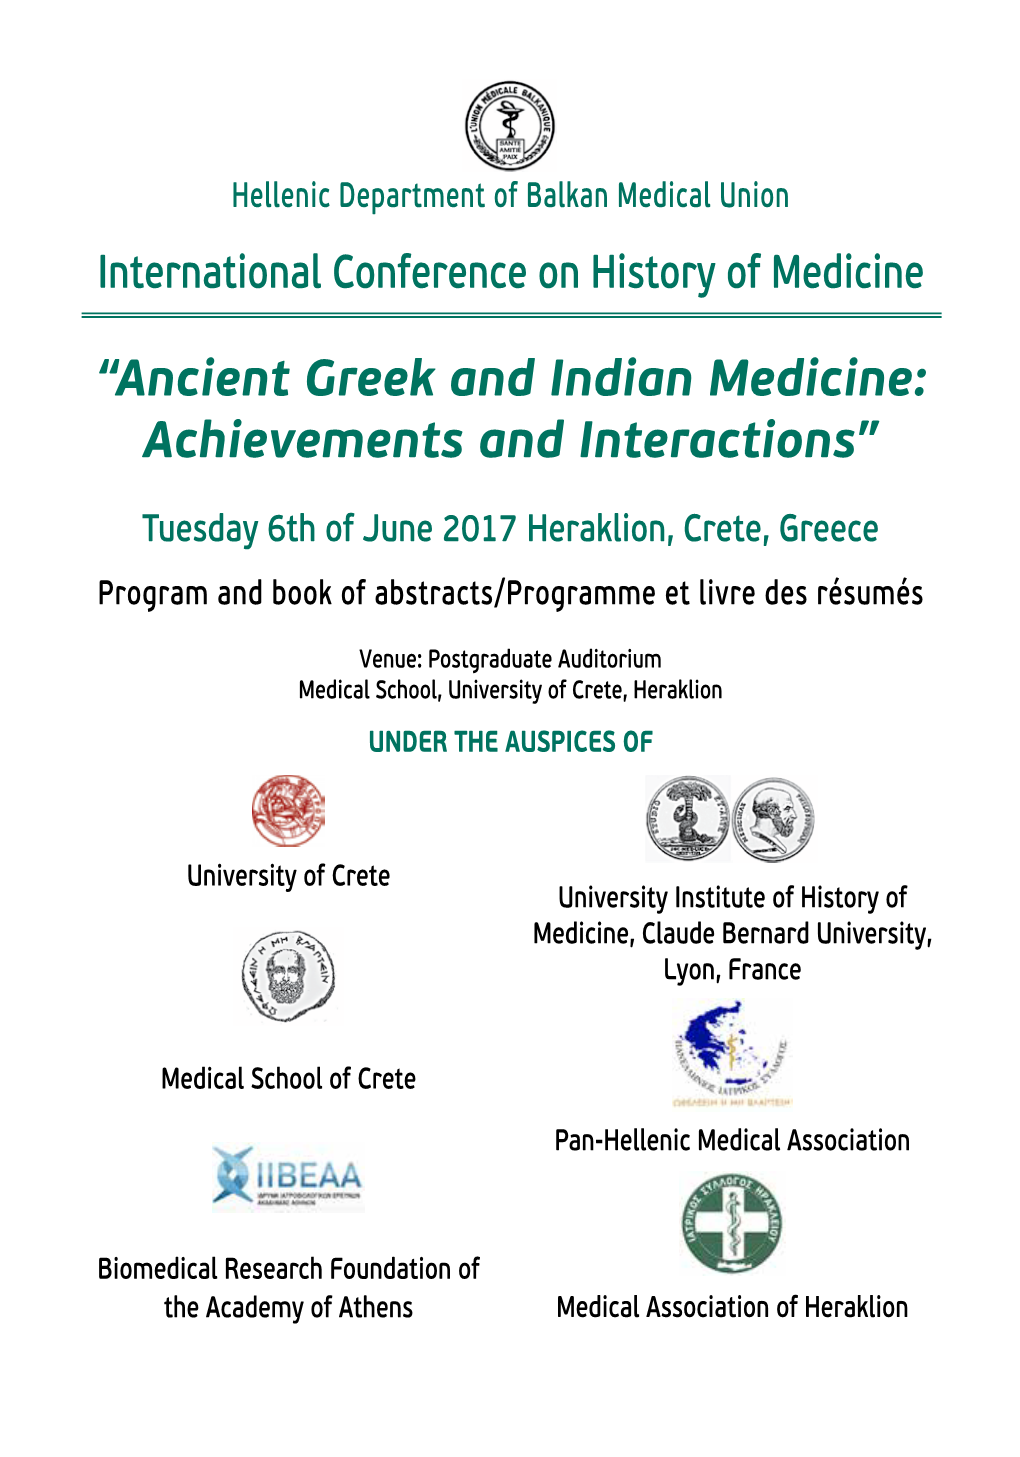 “Ancient Greek and Indian Medicine: Achievements and Interactions”